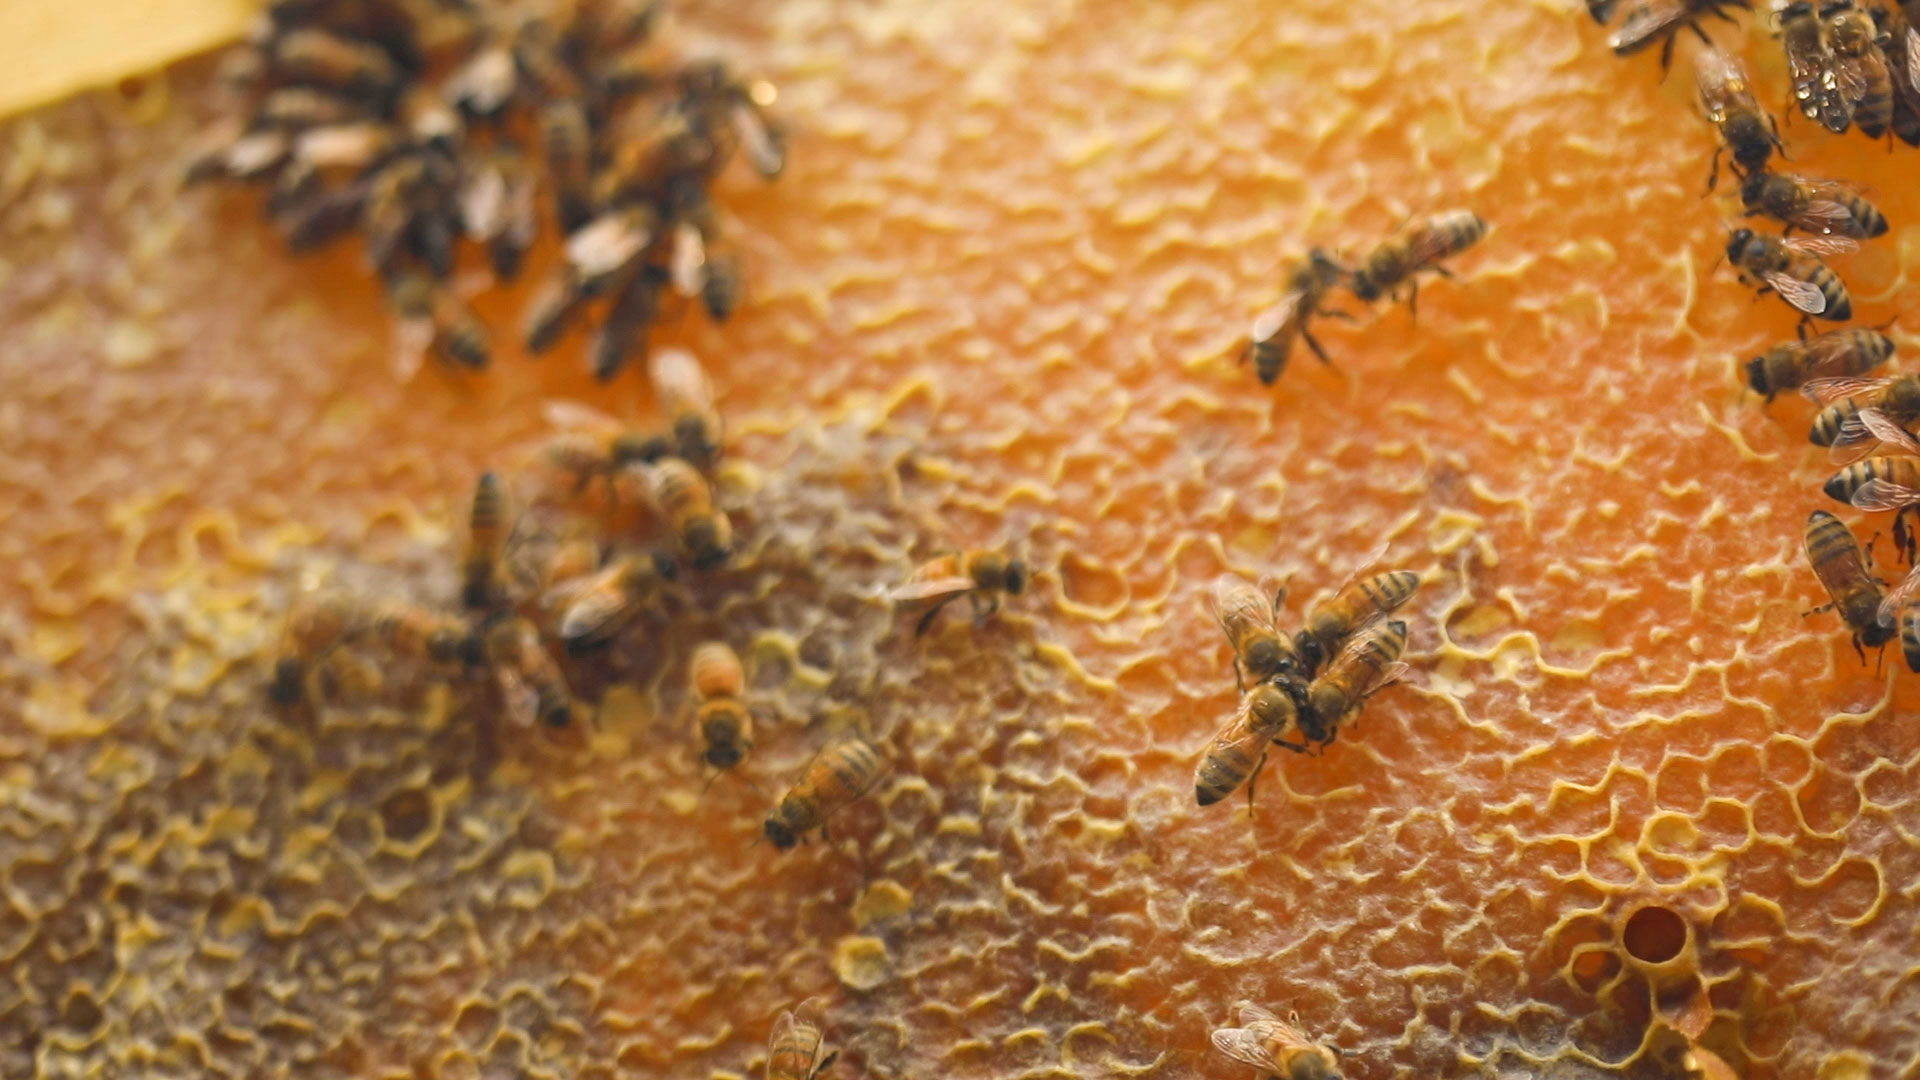 Hordes of bees swarm on a honeycomb